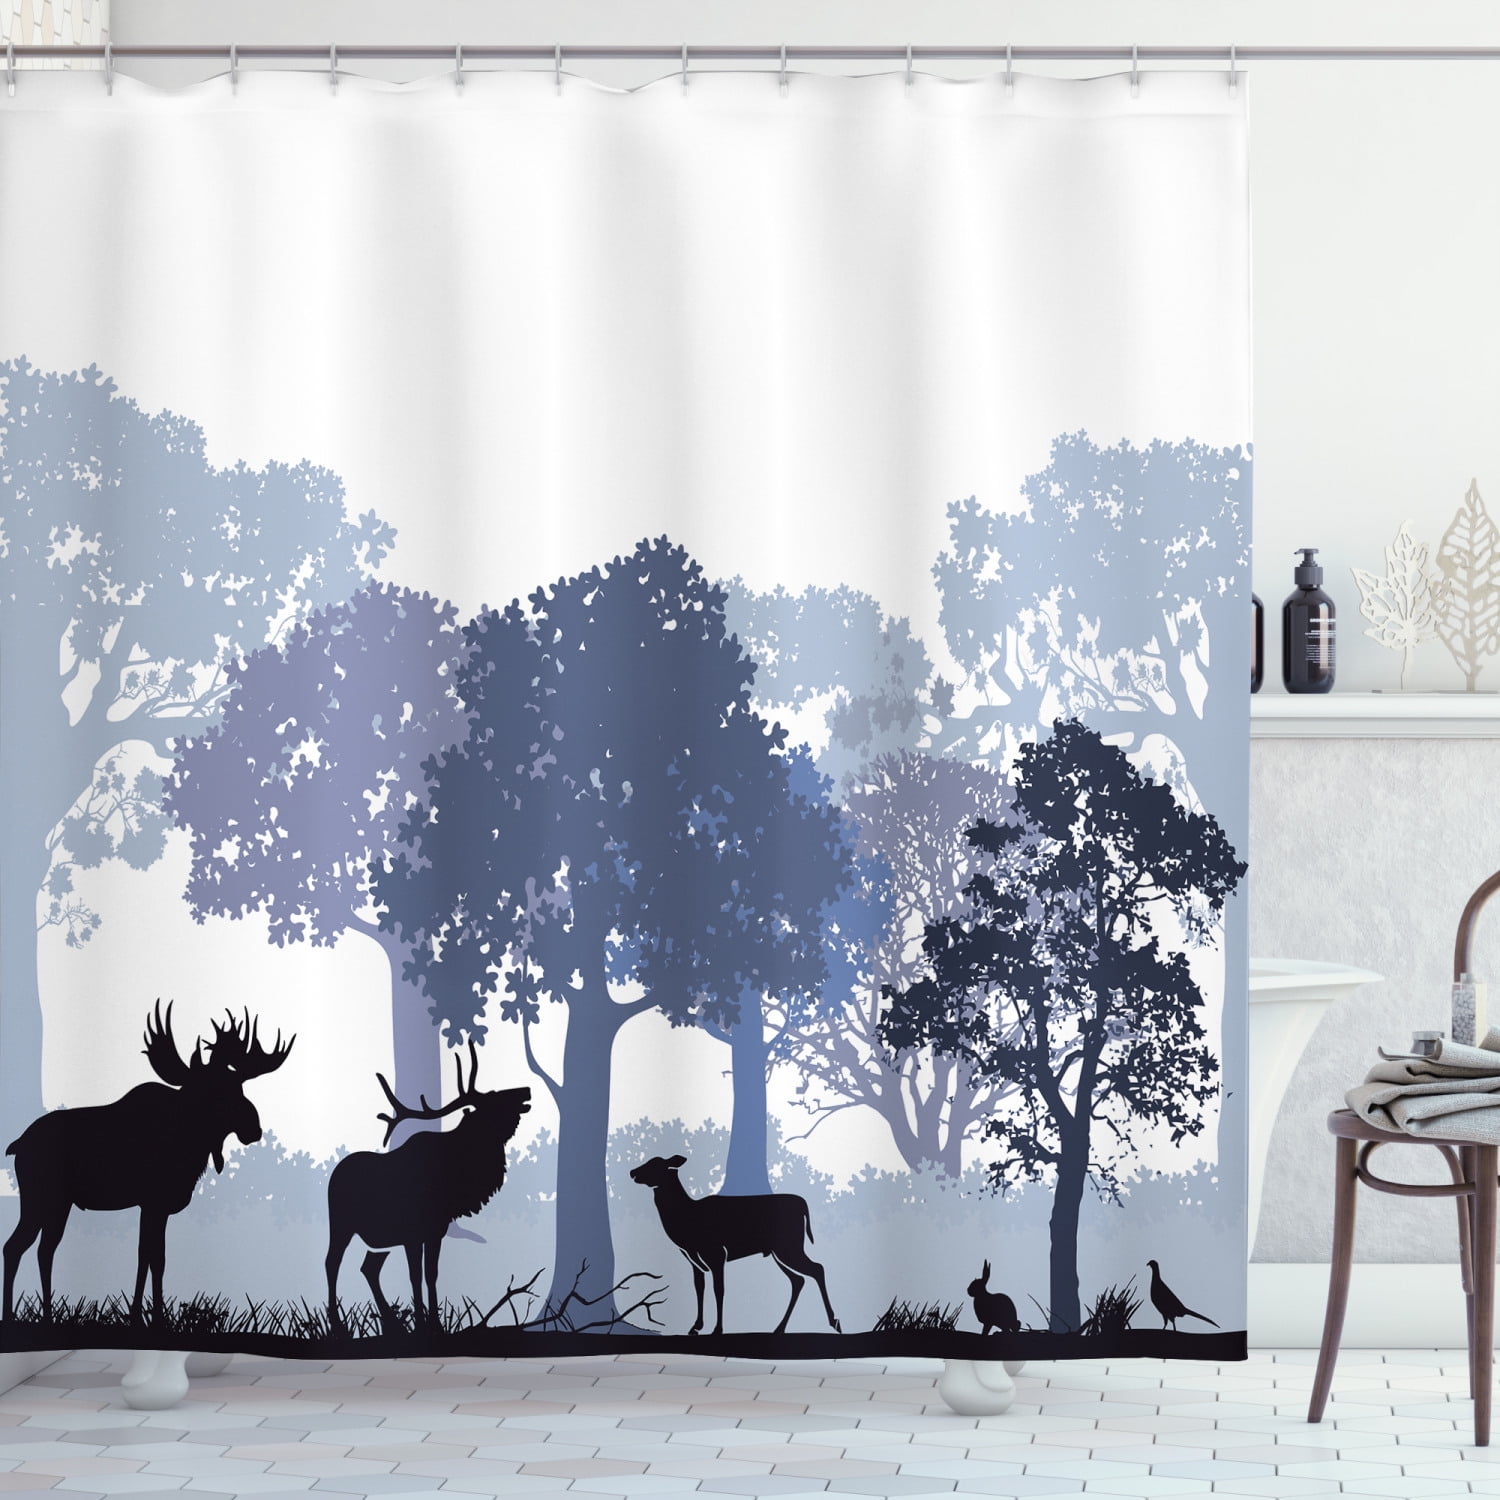 Moose Shower Curtain, Forest Design Abstract Woods North American Wild  Animals Deer Hare Elk Trees, Fabric Bathroom Set with Hooks, 69W X 70L  Inches, Black White Grey, by Ambesonne 